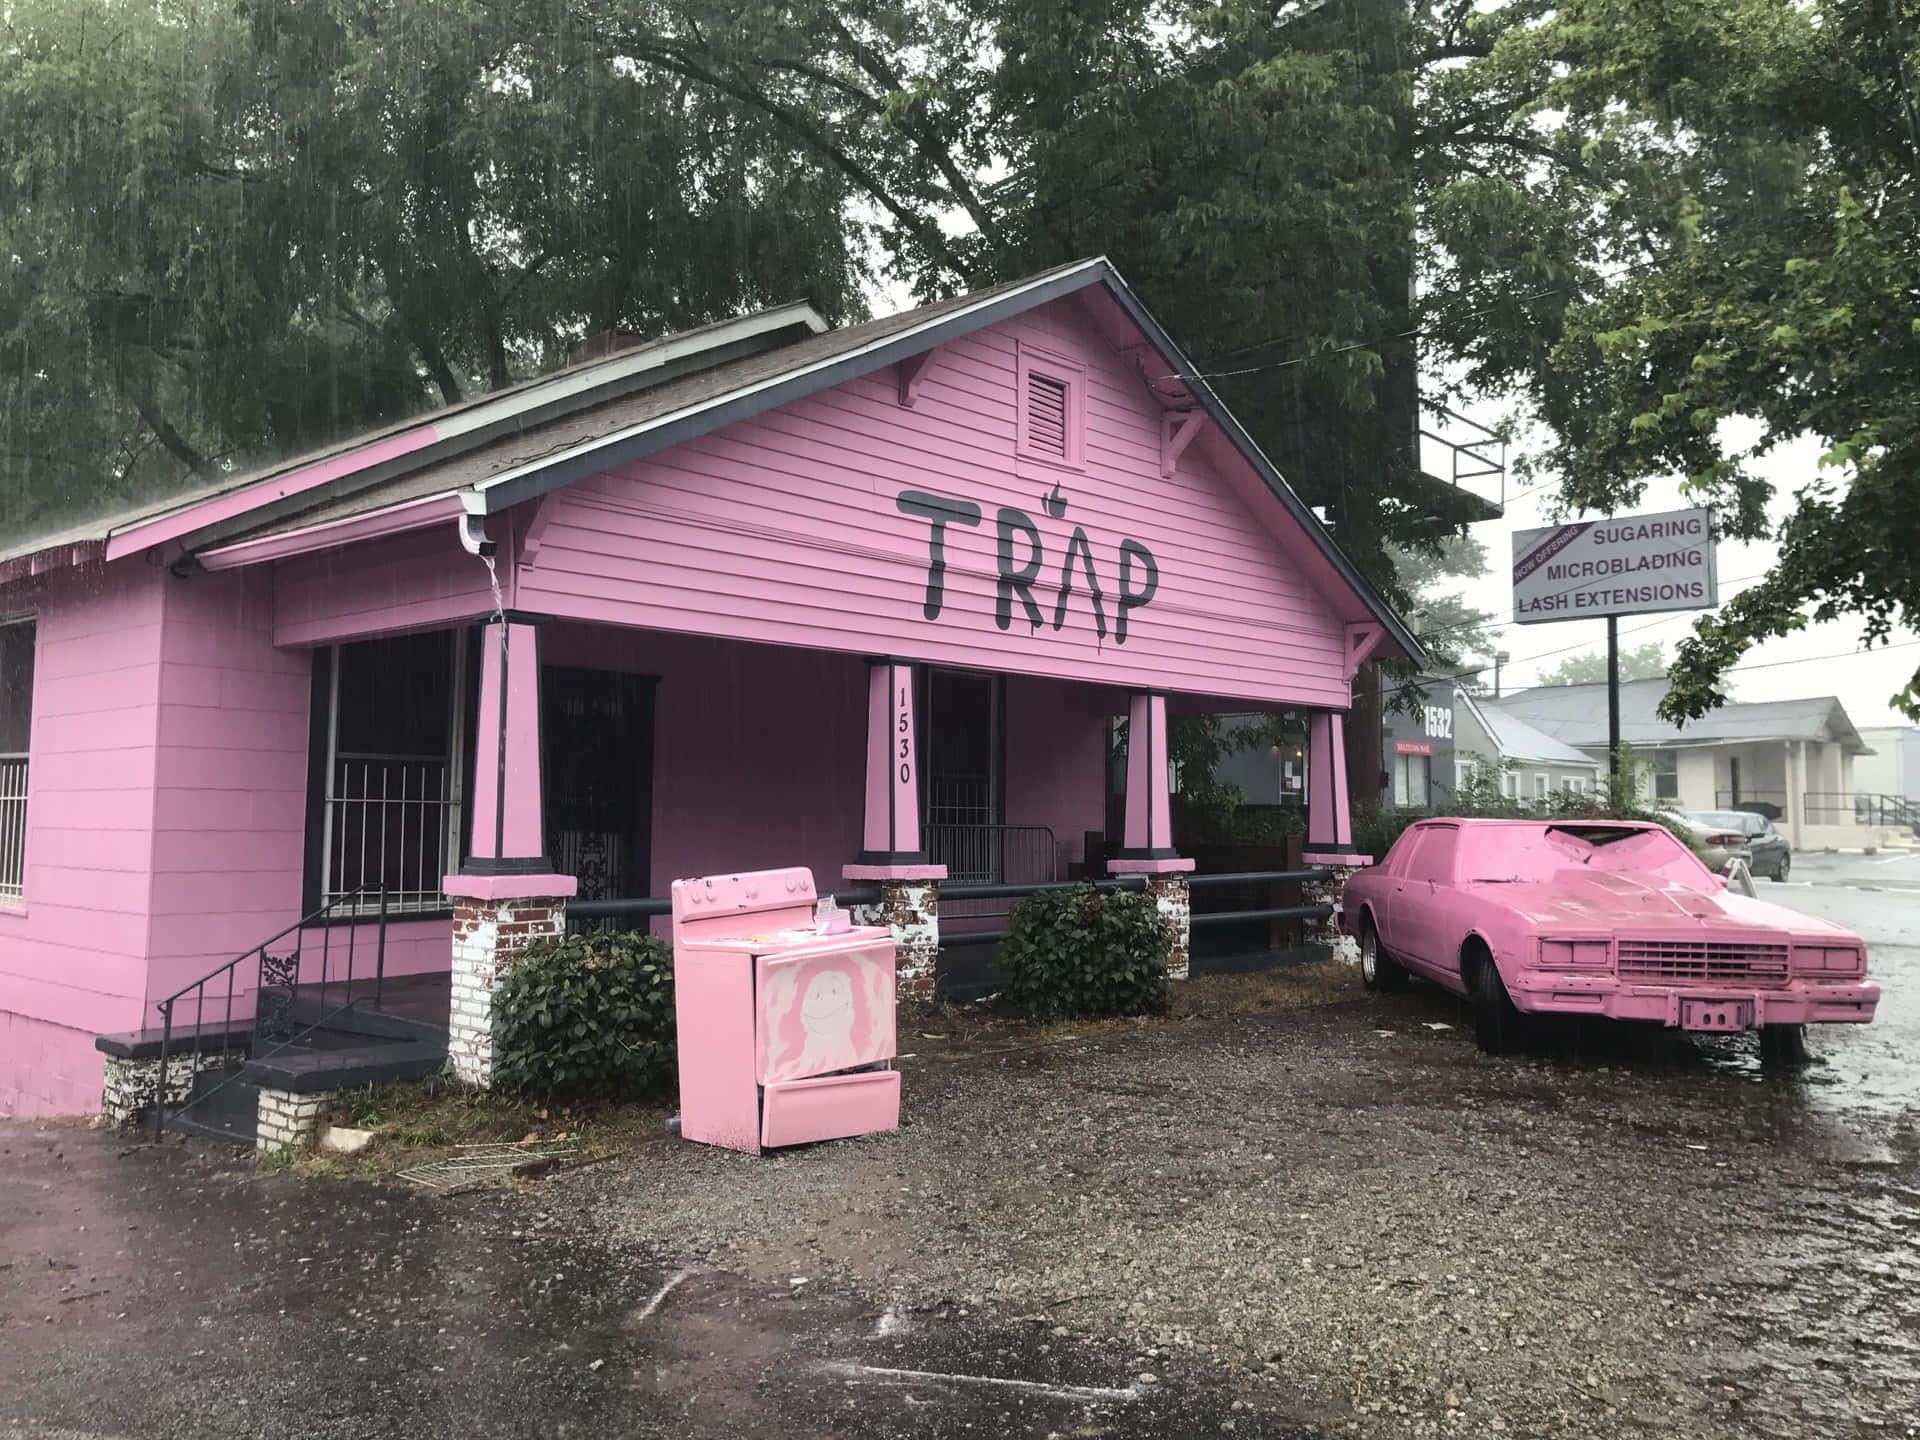 Mysterious Trap House in a Desolate Location